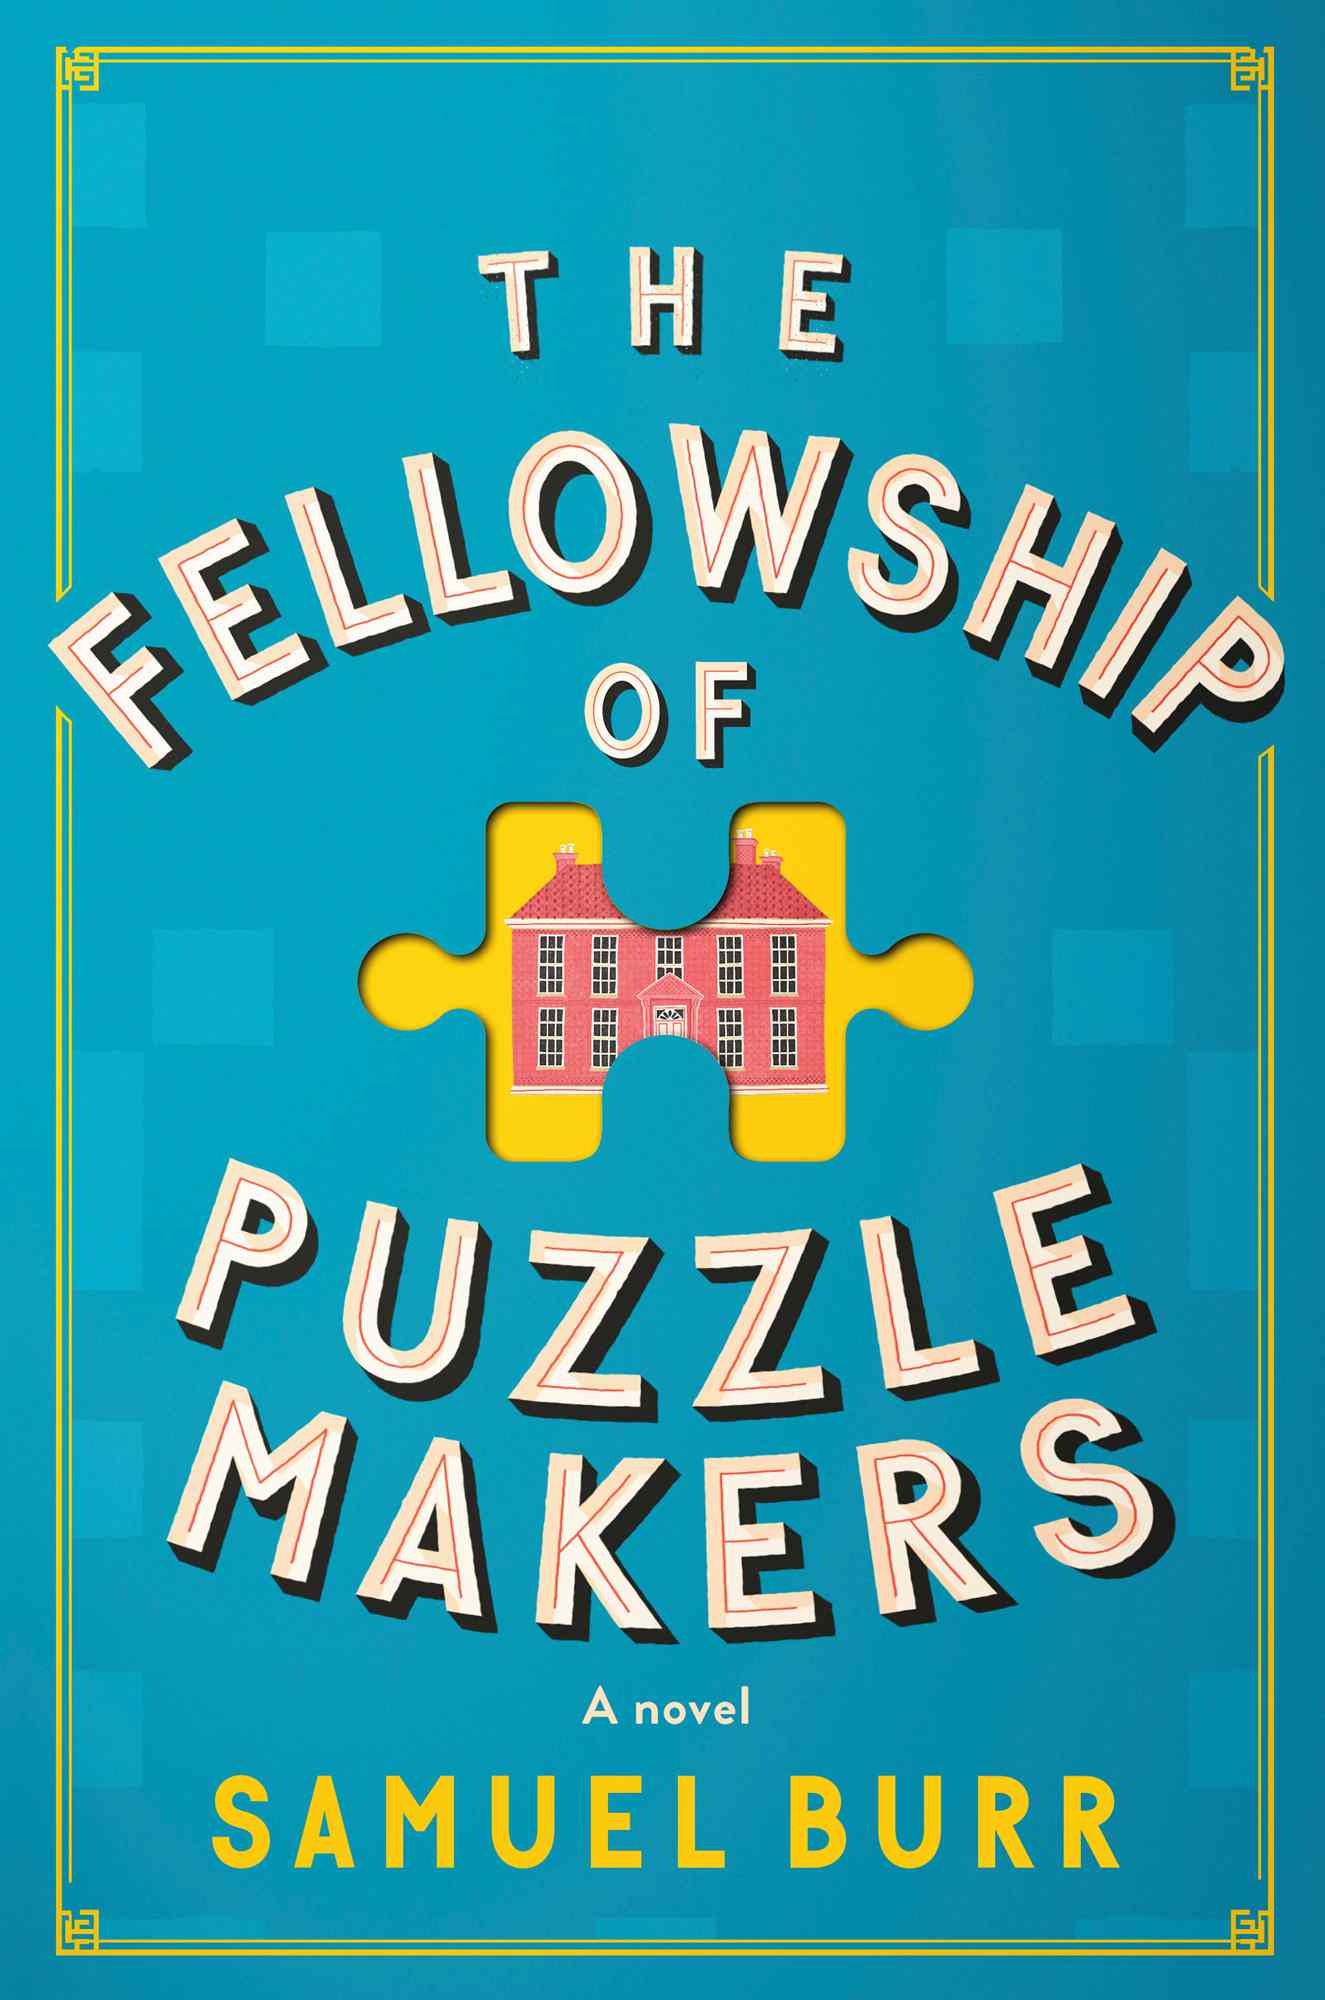 The Fellowship of Puzzlemakers, by Samuel Burr